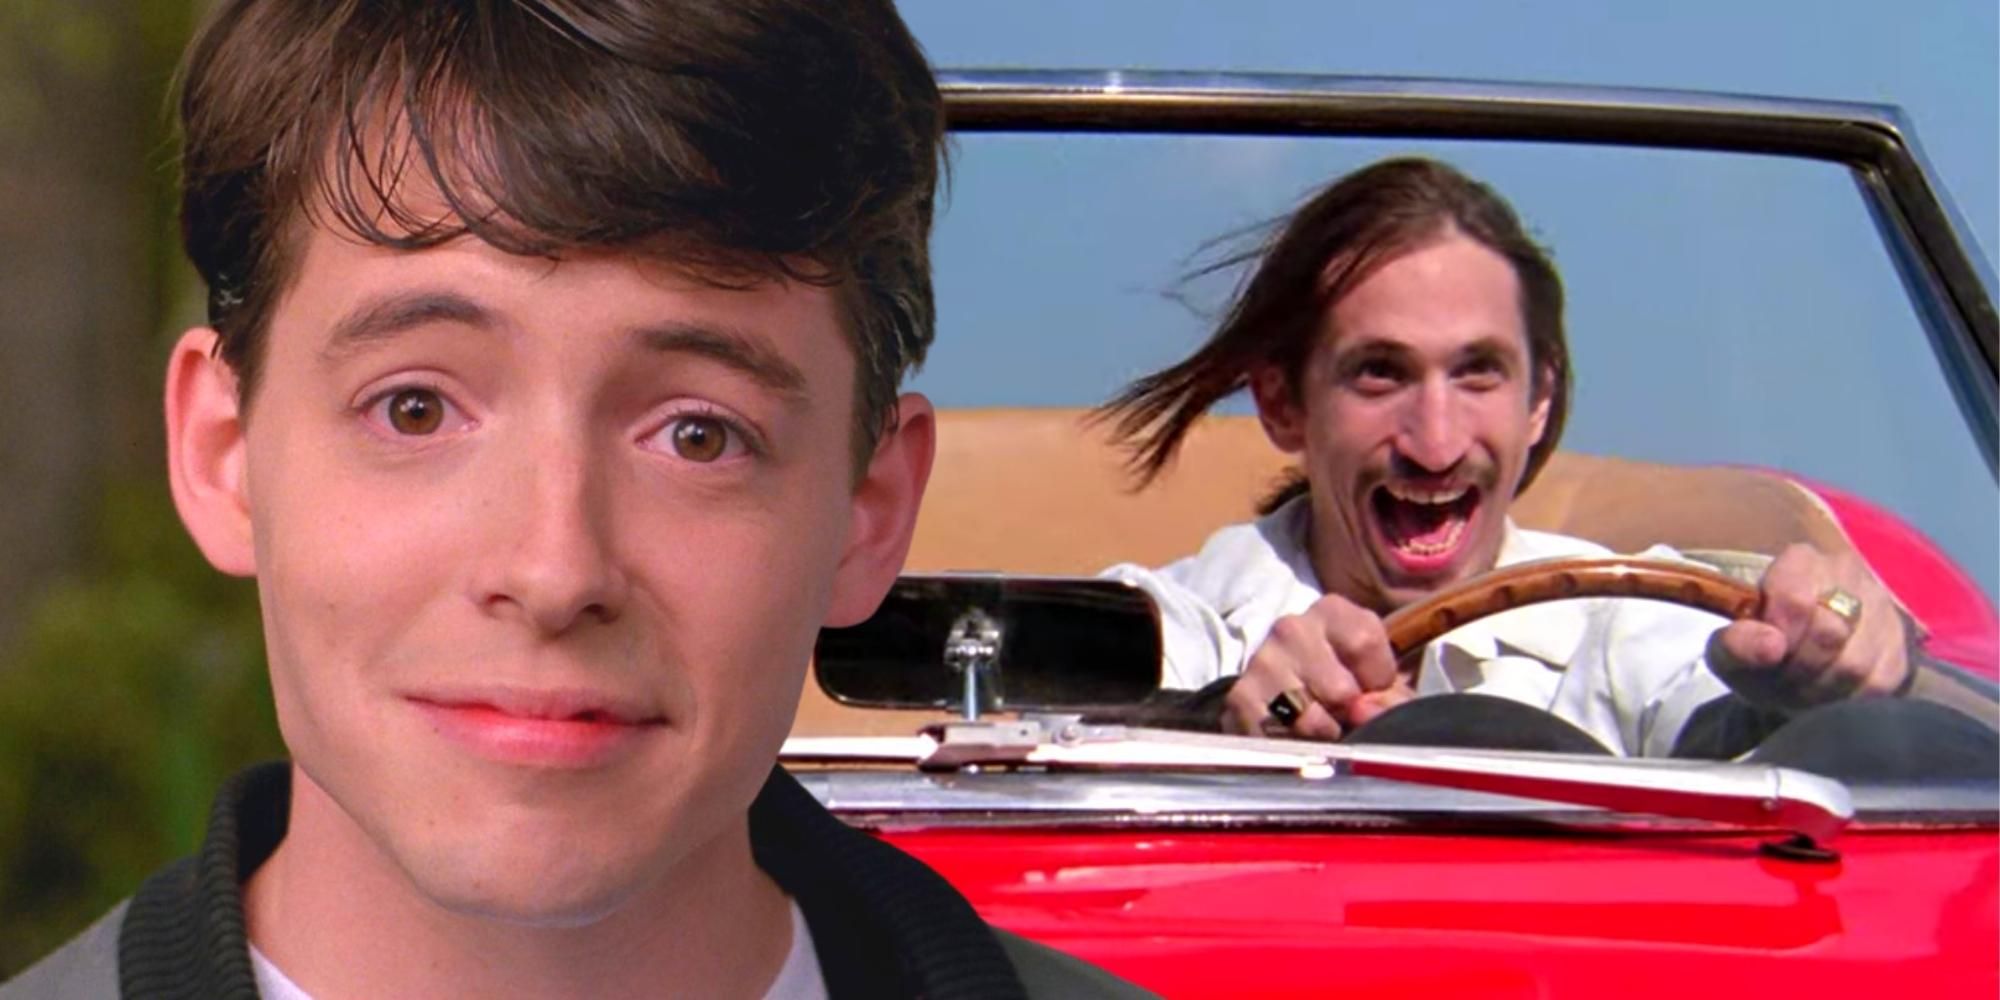 Matthew Broderick as Ferris Bueller and Richard Edson are the car valet in Ferris Bueller's Day Off